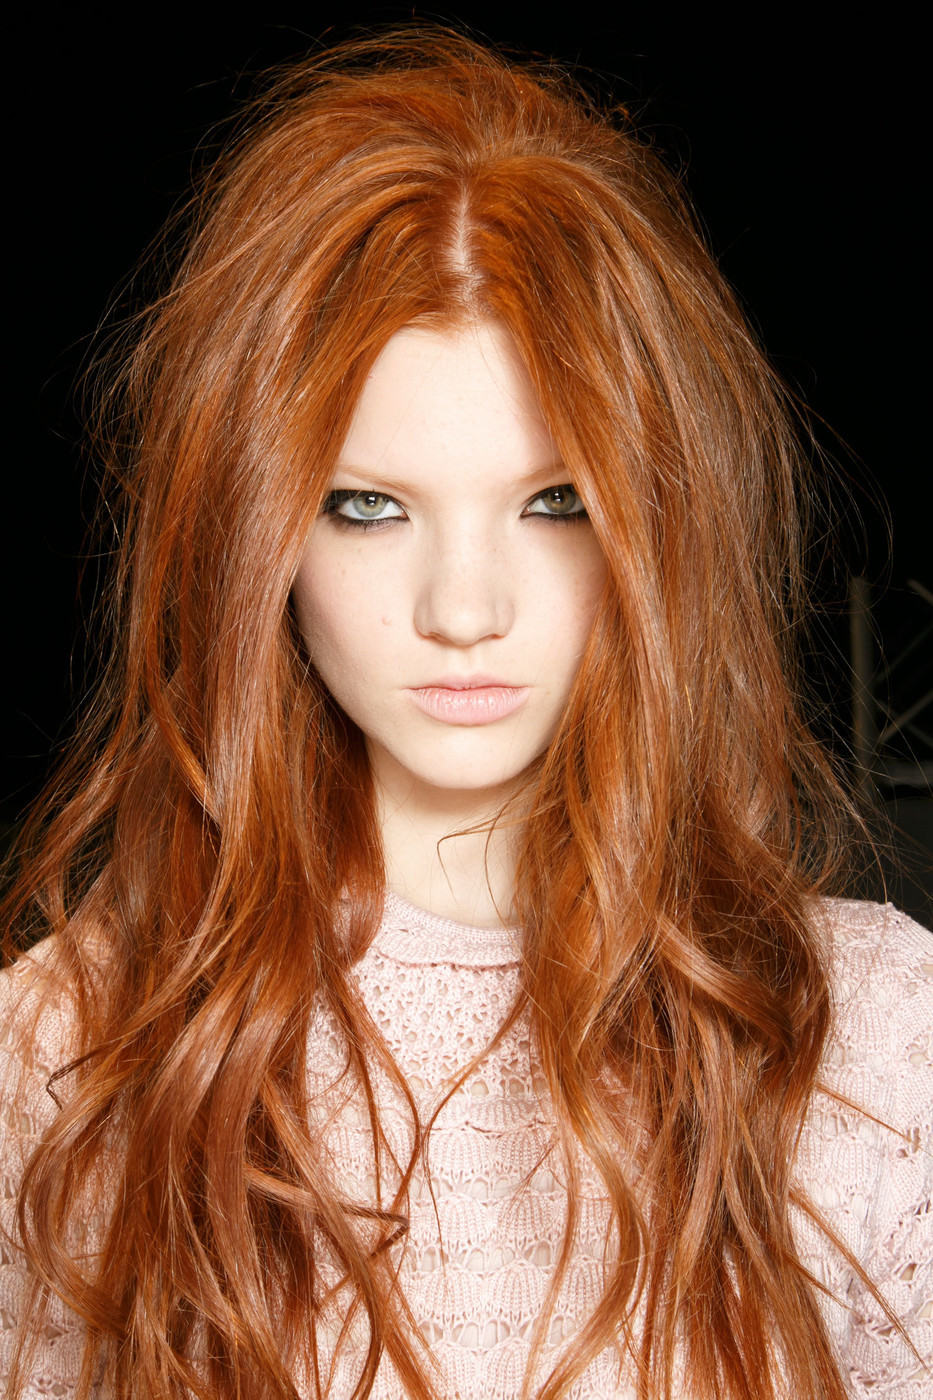 10 Redhead Runway Models You Should Know About